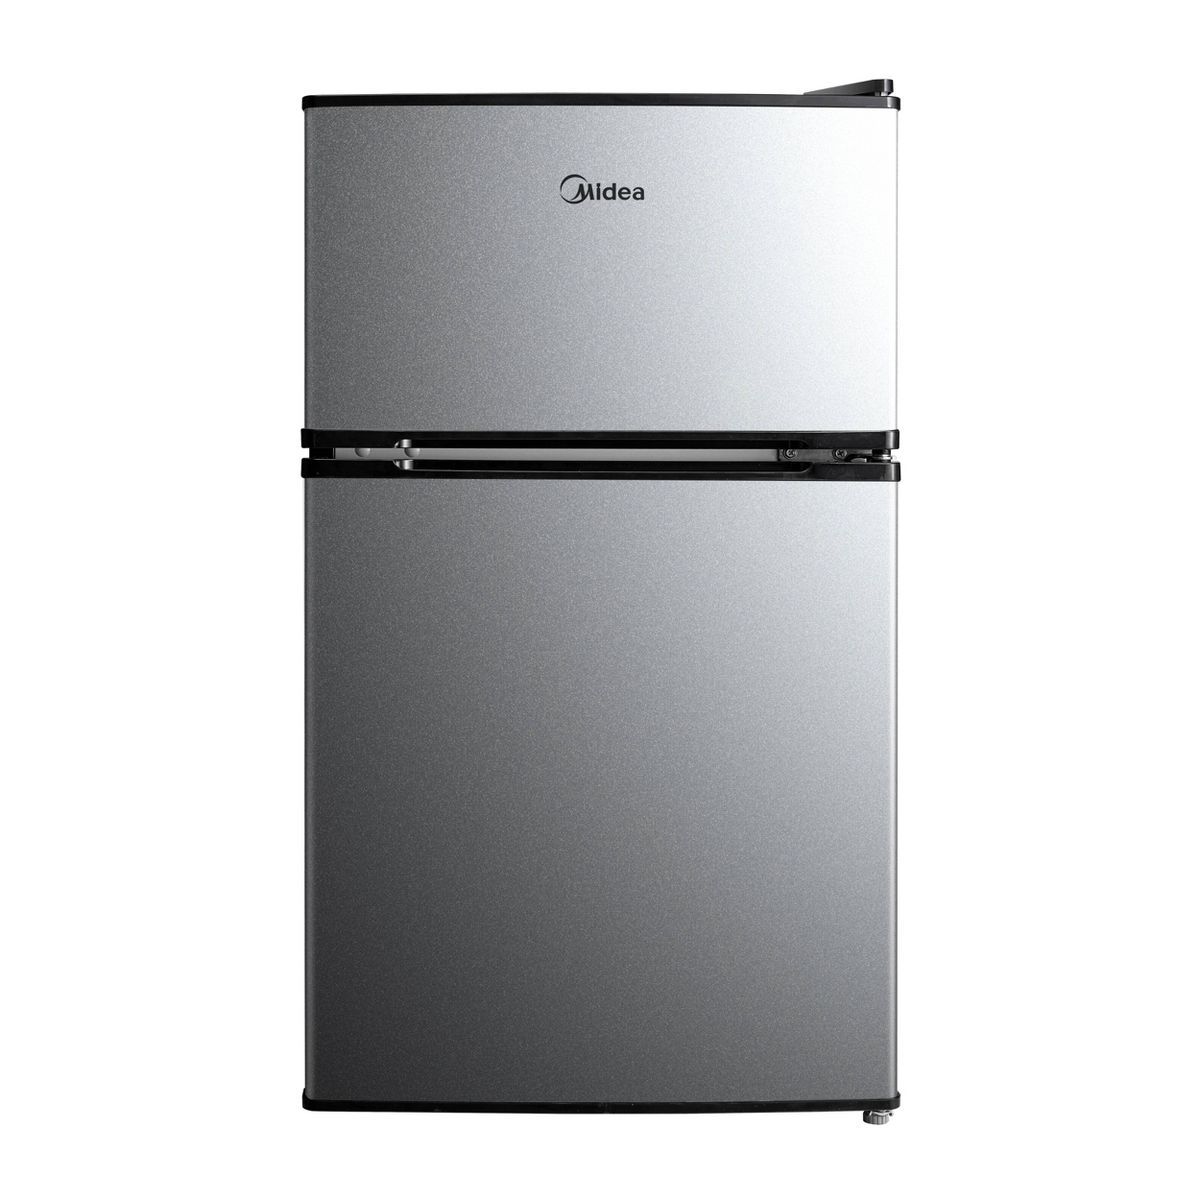 Midea 3.1 cu ft Compact Refrigerator Stainless Steel | Target